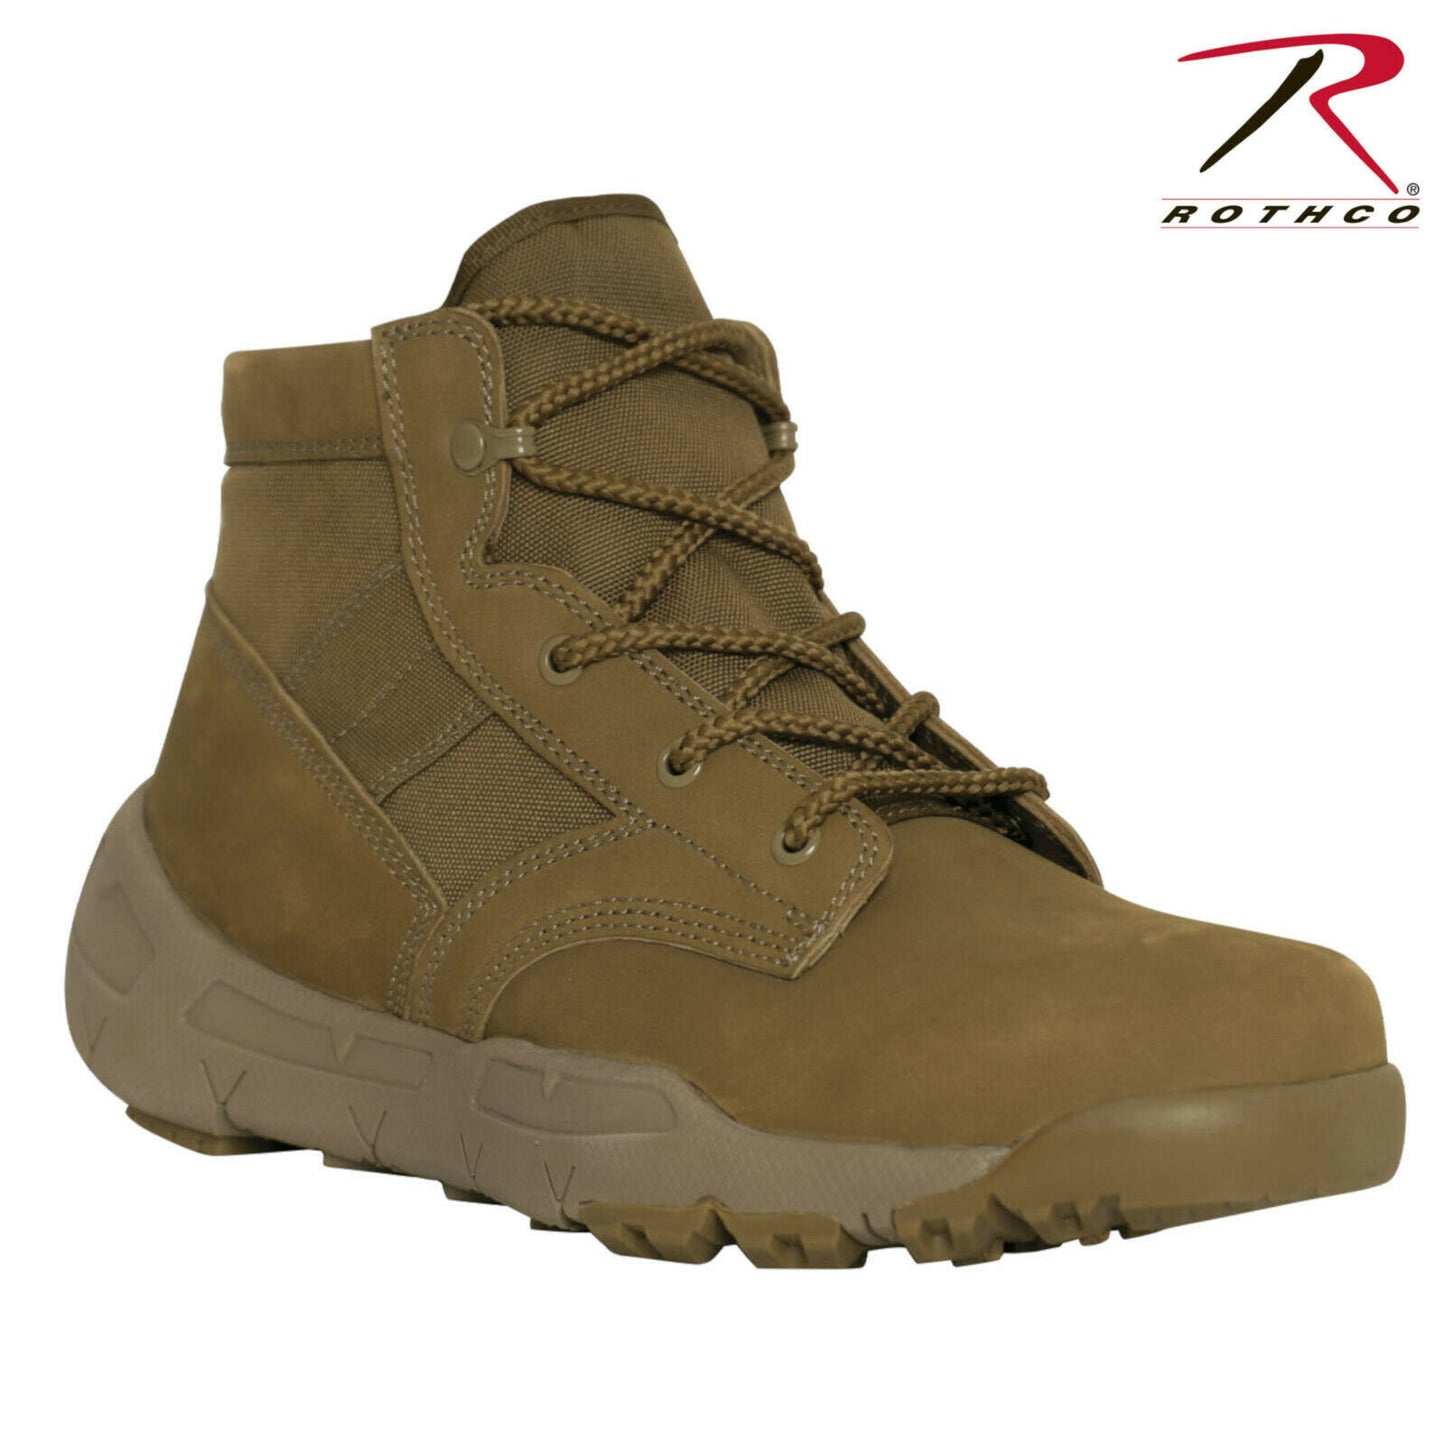 Rothco AR 670-1 Coyote Brown 6 Inch V-Max Lightweight Tactical All Purpose Boot